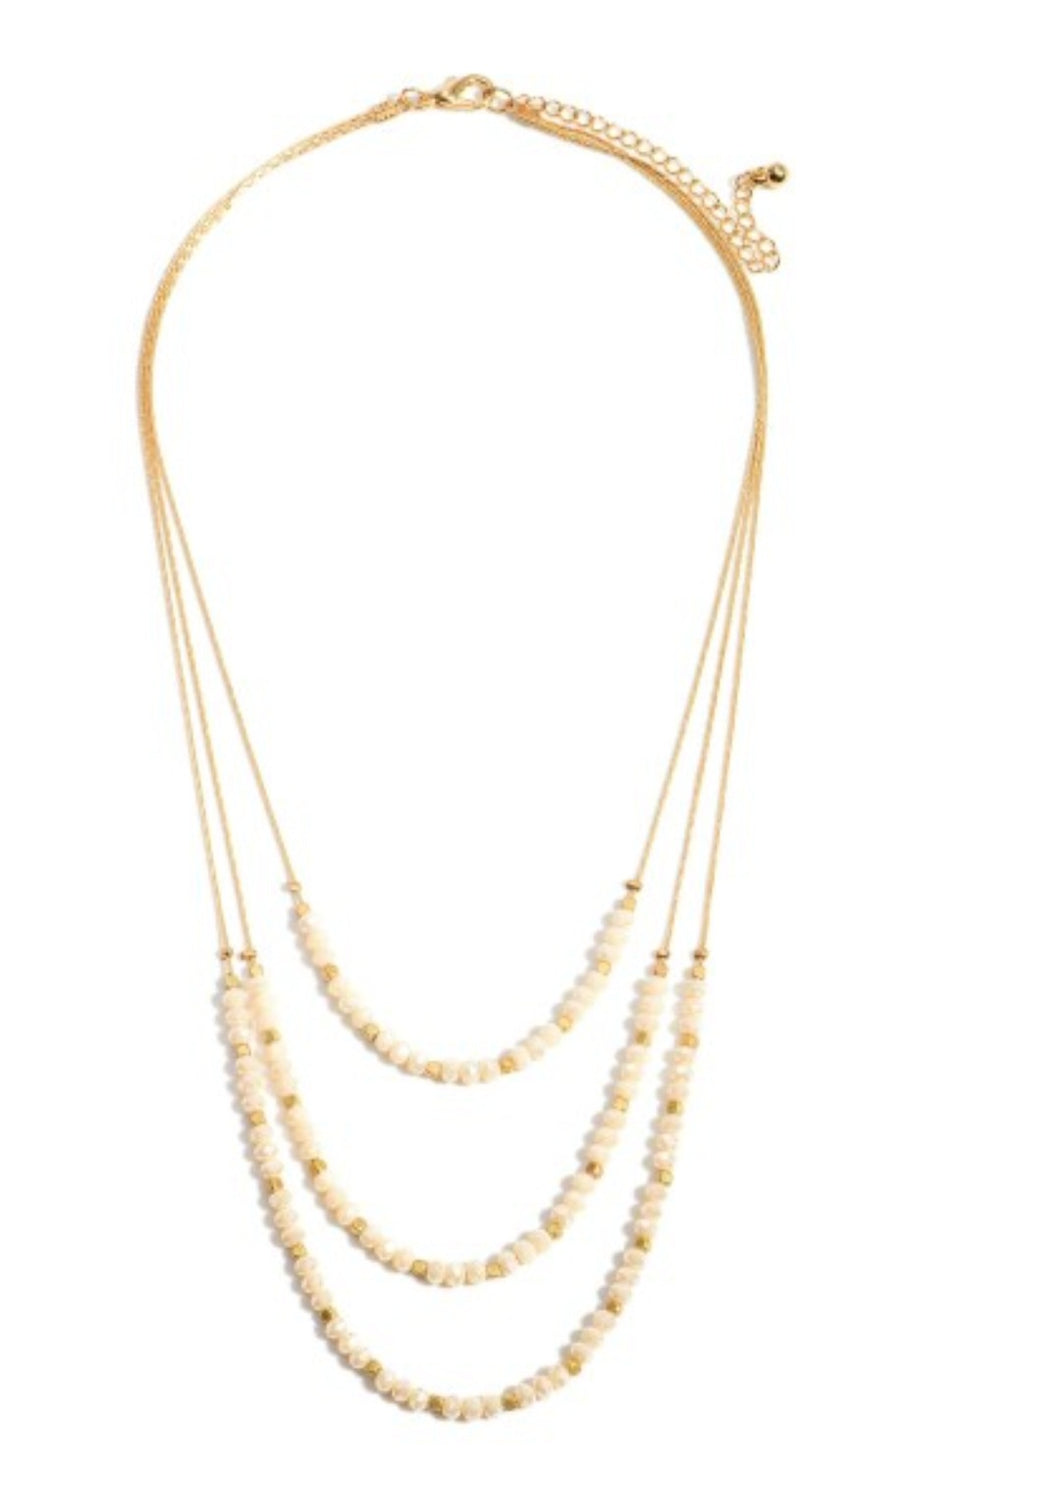 Gold Layered Necklace with Beads